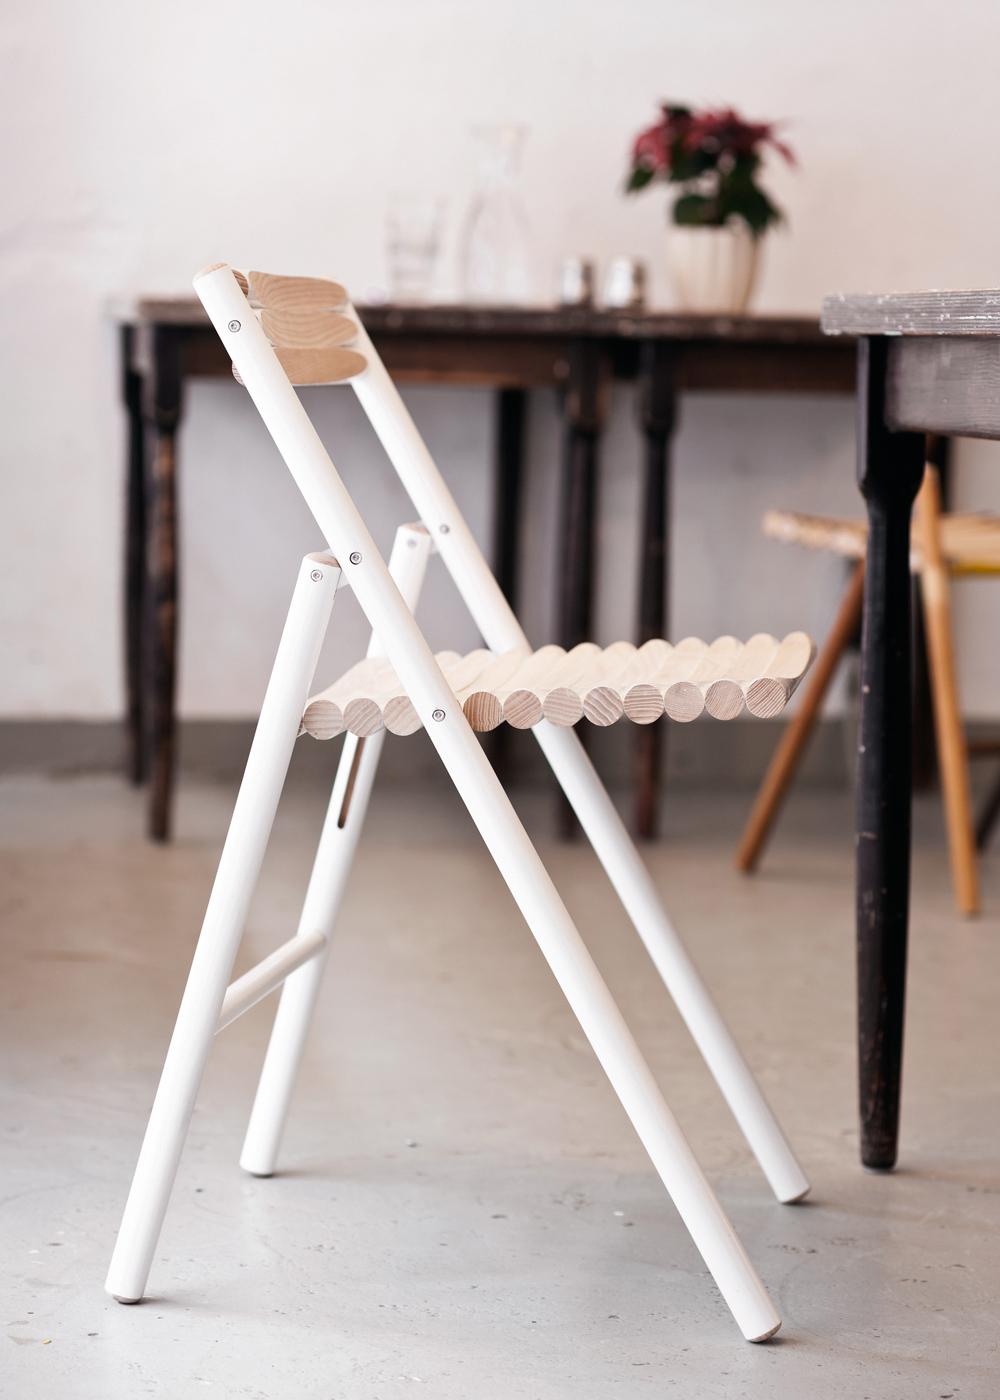 The name of this chair already gives away what the parts are made of: broom handles. A folding chair in which poetic simplicity and sophistication come together. There are two versions: one with reused handles and one with new, ash wood handles. The